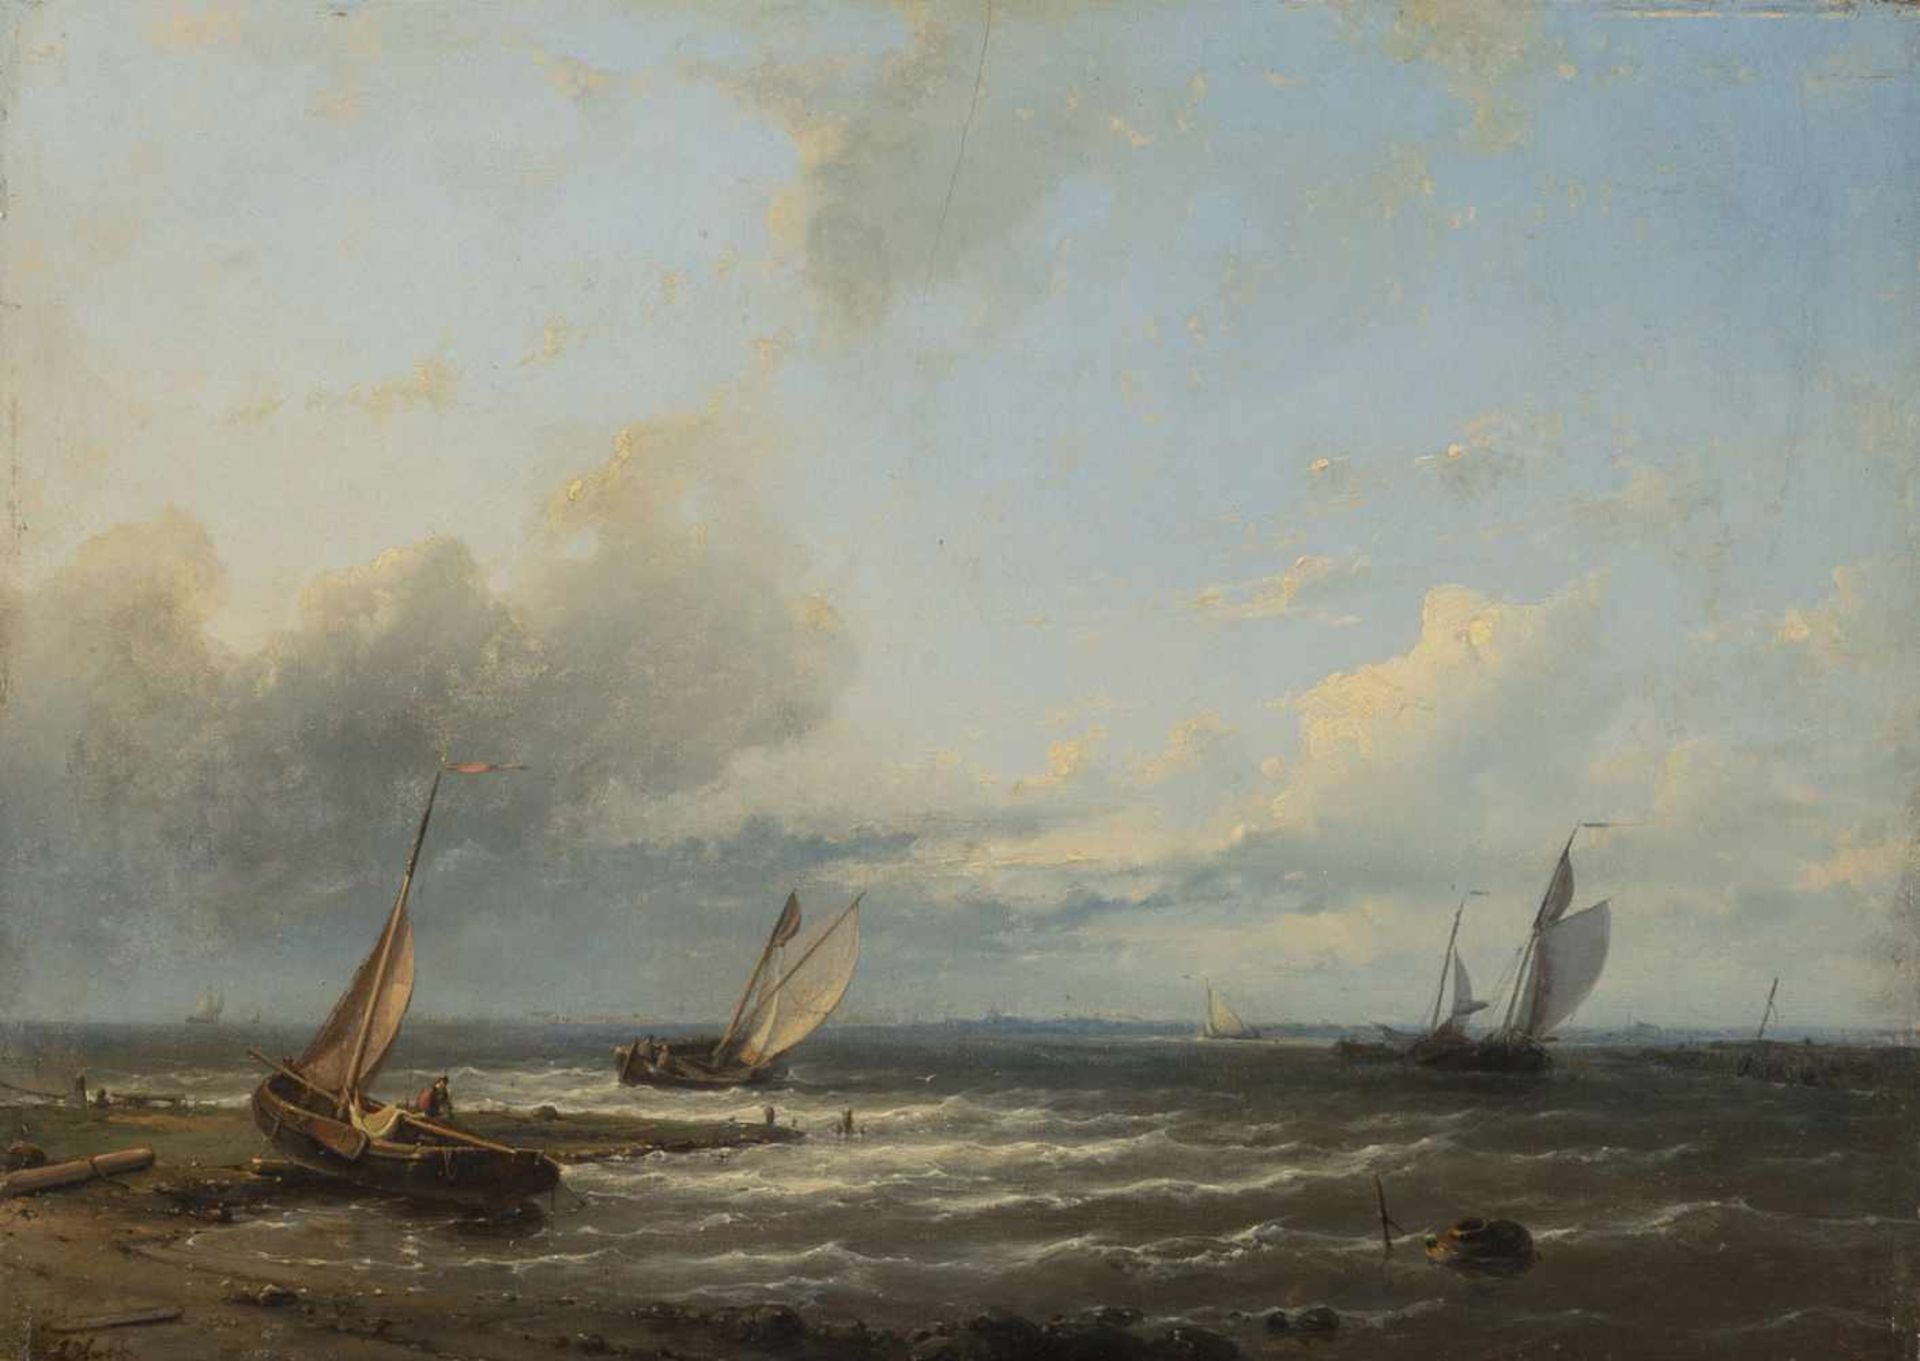 HULK, ABRAHAM (1813-1897). Sailing ships in moderately agitated sea with cloudy sky. Oil/panel,